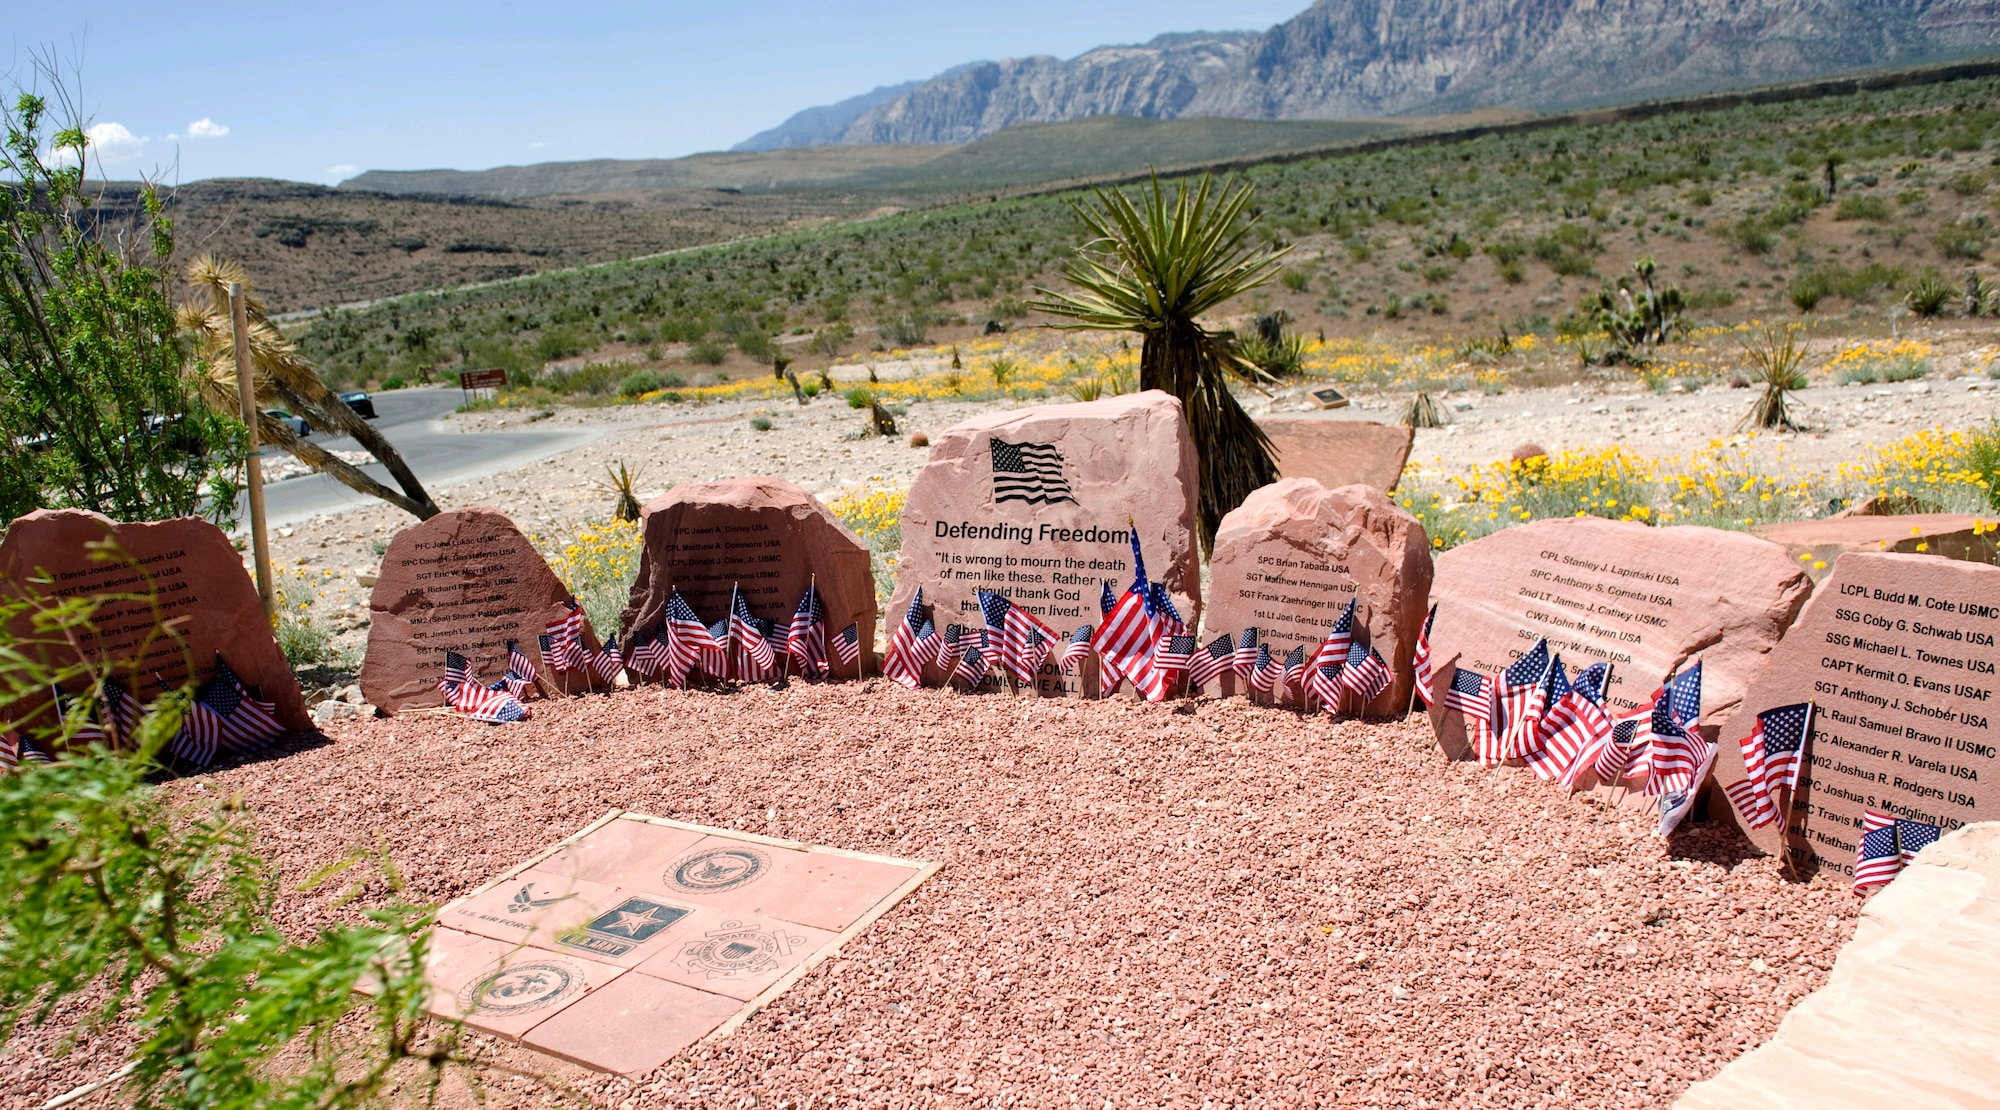 LAS VEGAS -- The Defending Freedom Memorial is located at the Red Rock National Conservation Area in Las Vegas.  The memorial was initially dedicated in 2005 and is comprised of seven sandstones with the engraved names of Nevada's fallen servicemen and women. In 2011, the names Nellis Airmen Senior Airman Michael Buras, Staff Sgt. David Smith, 1st Lt. Joel Gentz and Capt. David Wisniewski were added to the memorial. All four Airmen were lost in 2010 while supporting operations in Afghanistan.  (U.S. Air Force photo by Airman 1st Class Jamie L. Nicley)
